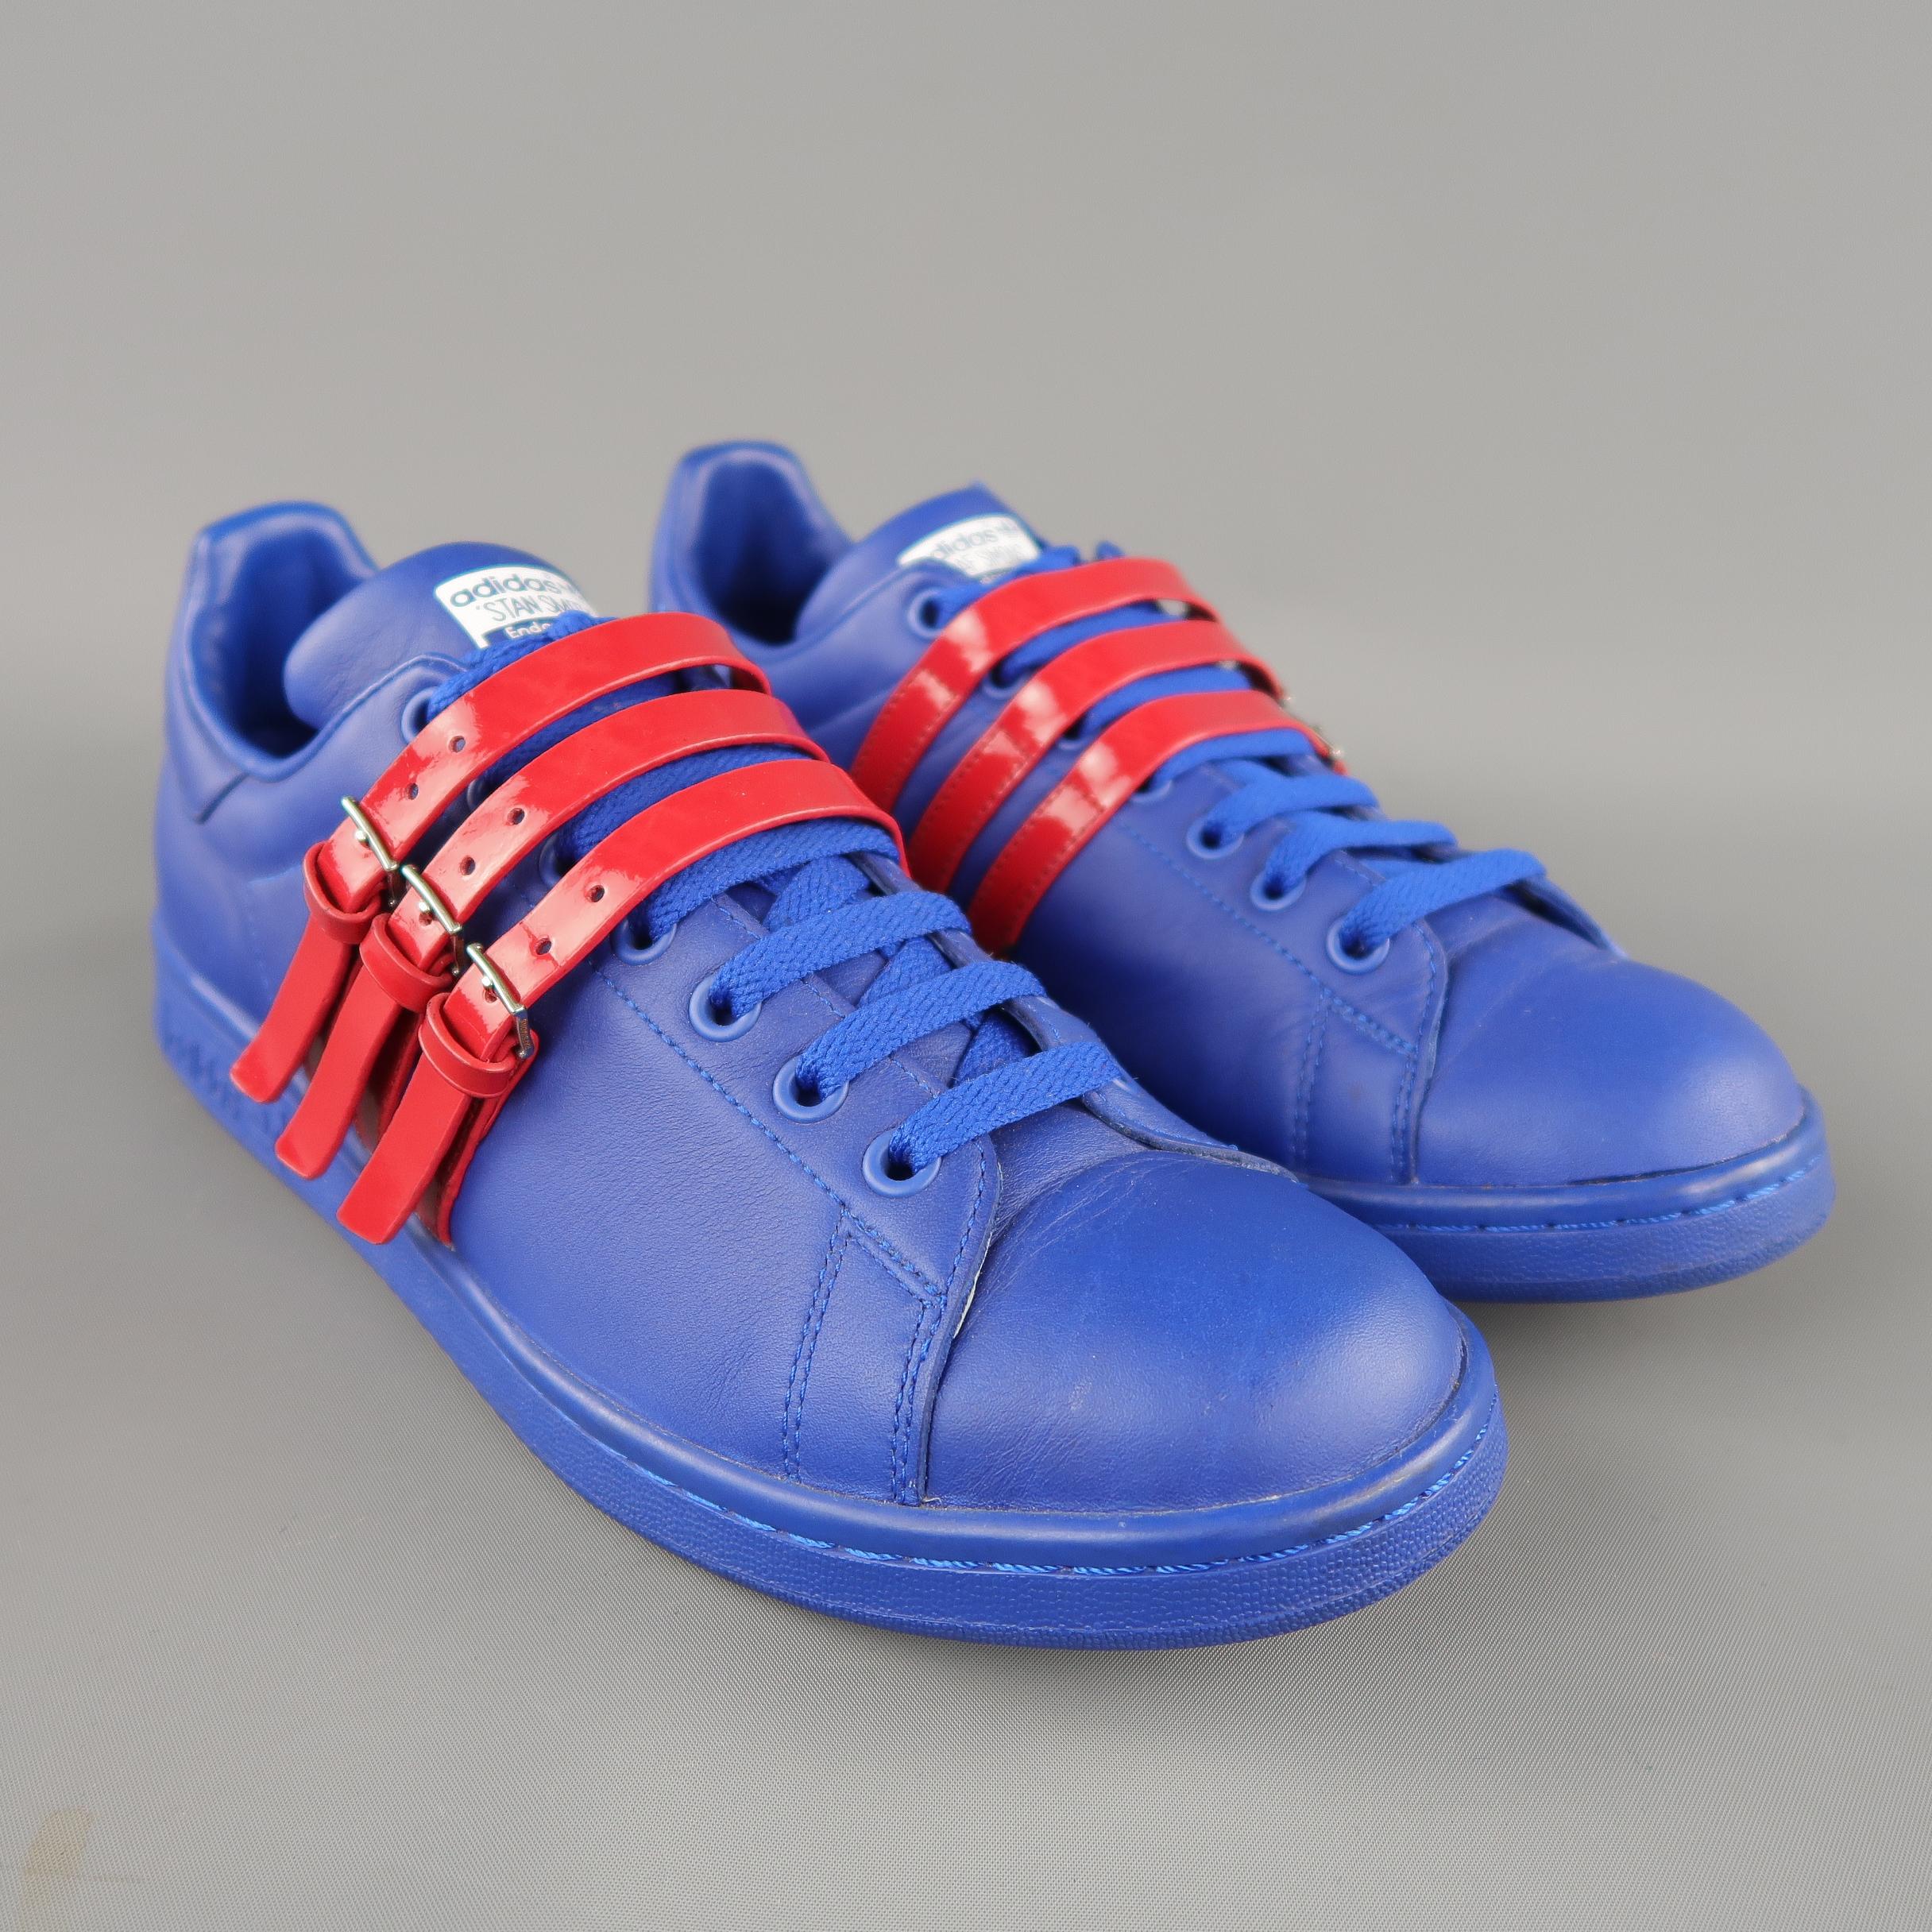 RAF SIMONS ADIDAS Stan Smith sneakers come in royal blue leather with red patent leather straps. With box.
 
Excellent Pre-Owned Condition.
Marked: 9.5
 
Outsole: 11.5 x 4 in.